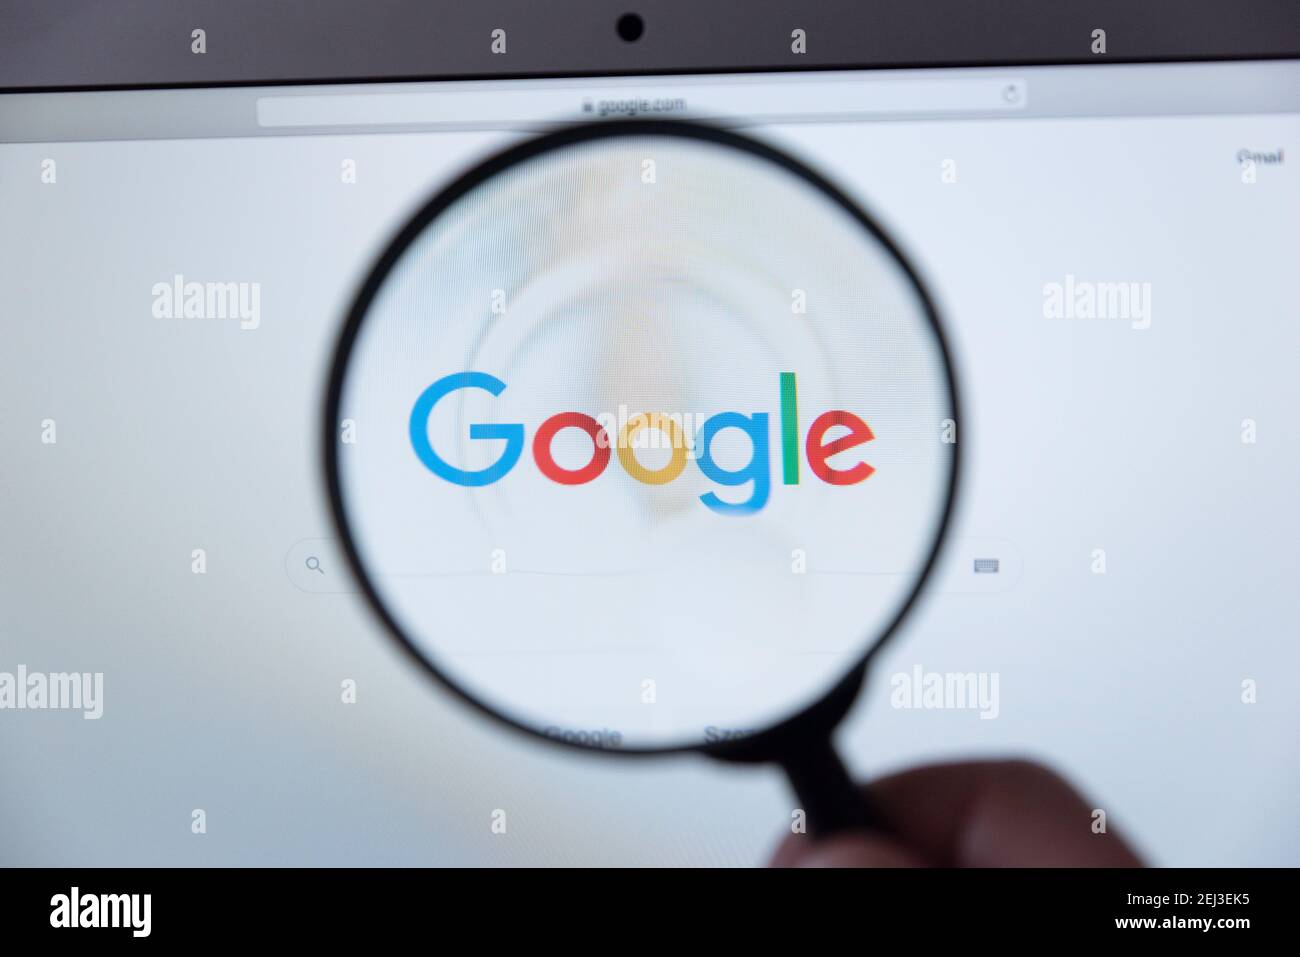 Wroclaw, Poland - DEC 2, 2020: Google logo through a magnifying glass. Google is most popular web search engine Stock Photo